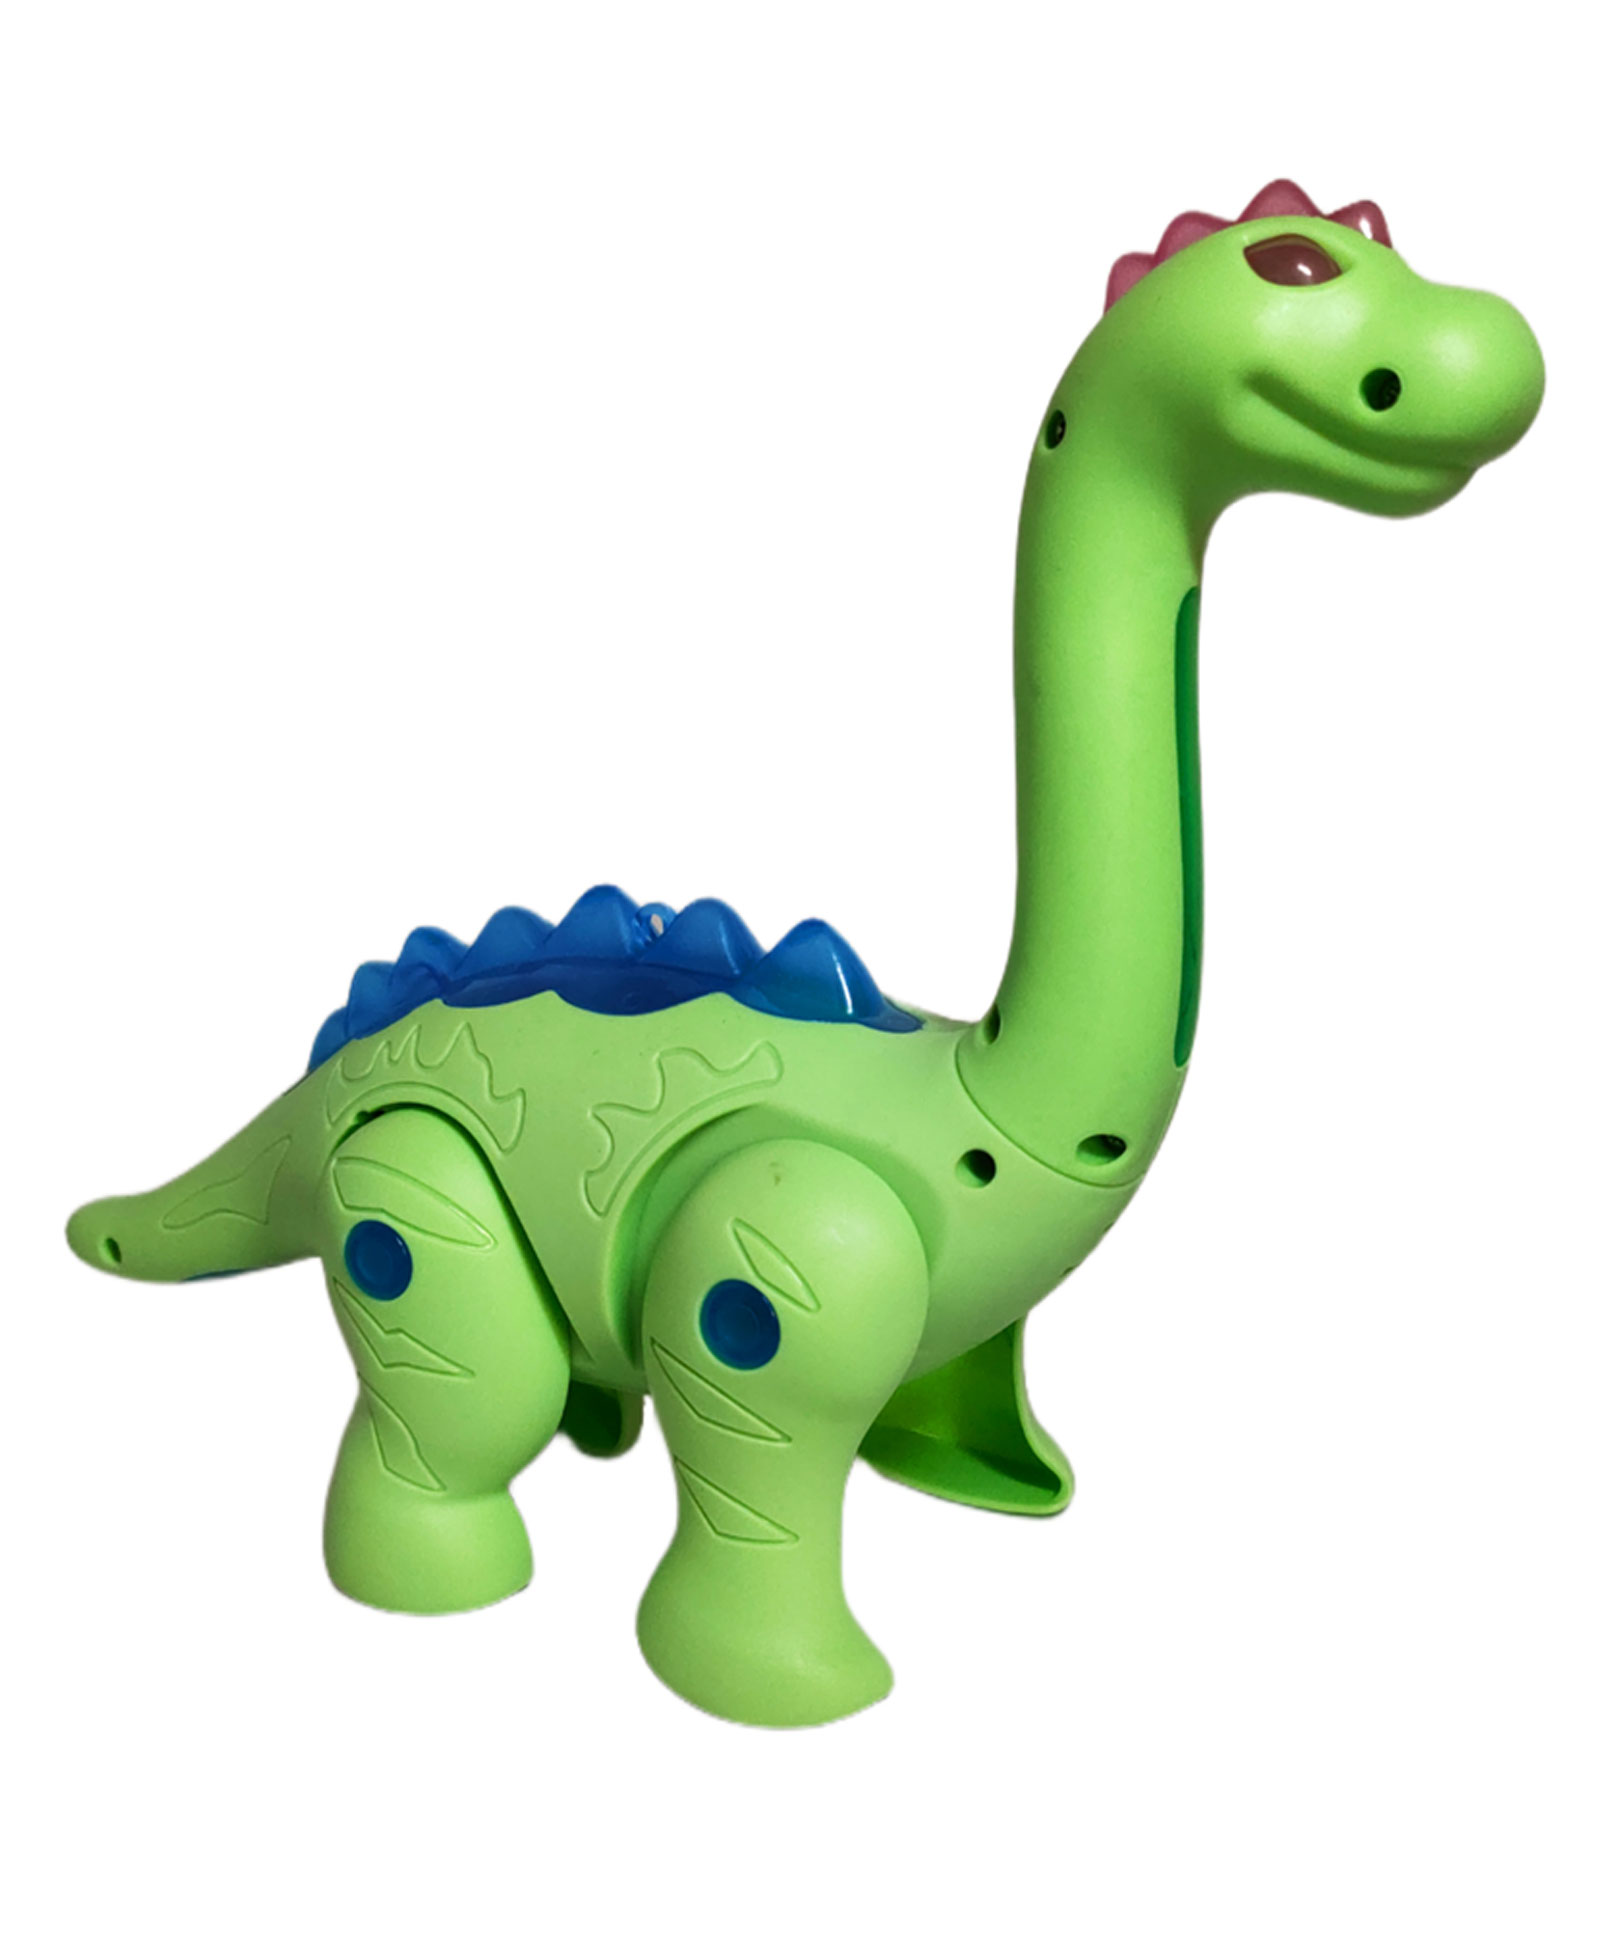 VParents Pull Along Musical Dinosaur Toy for Kids with Colorful Lights  (Multicolor) -(Colour may Vary) Online India, Buy Musical Toys for (0-24  Months) at  - 12101550